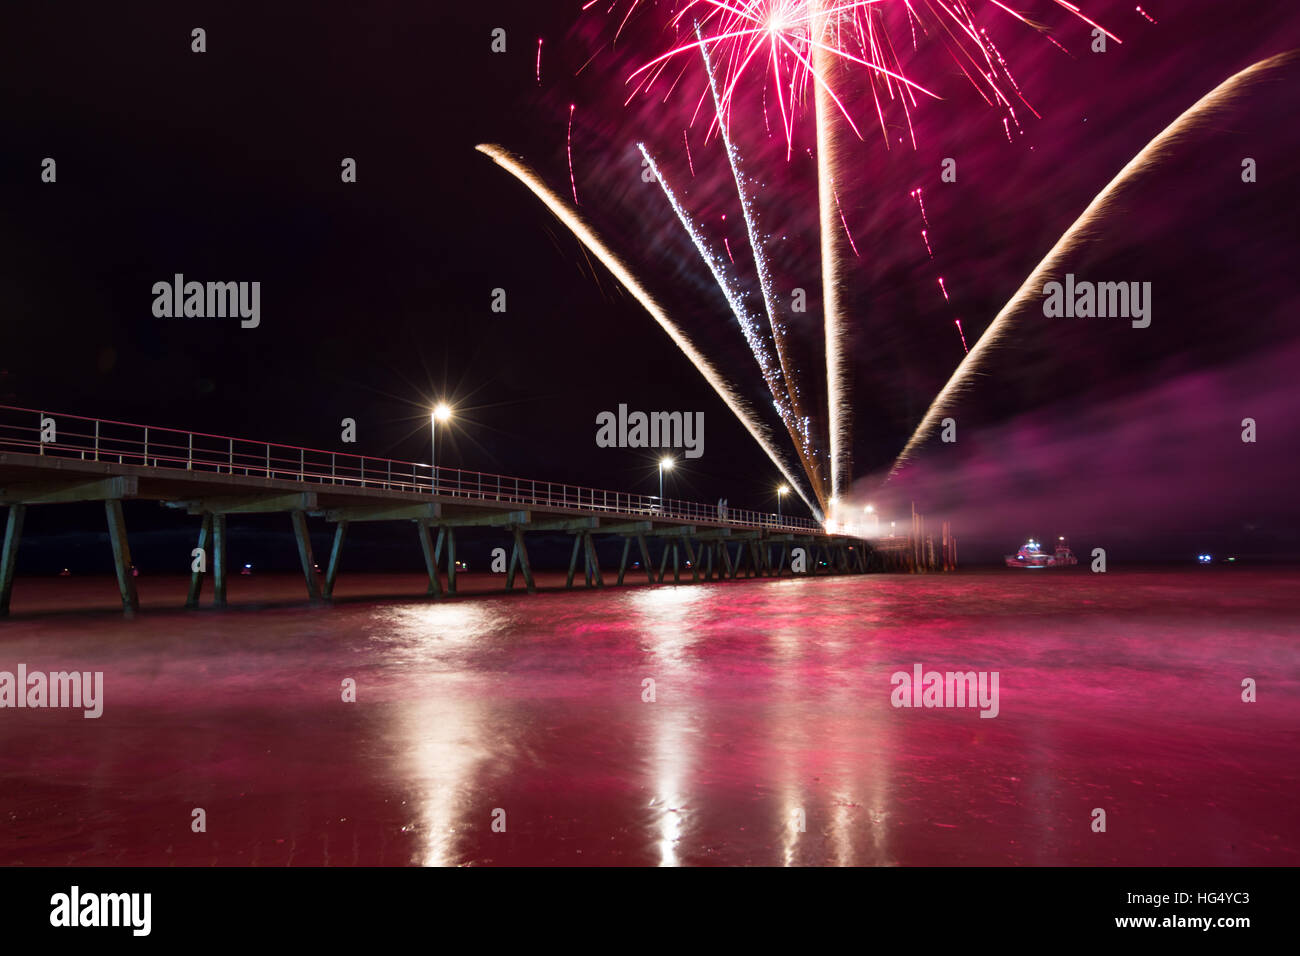 Colourful 2017 New Years Fireworks Display lighting up the sky and water off Glenelg Jetty, Adelaide, South Australia Stock Photo